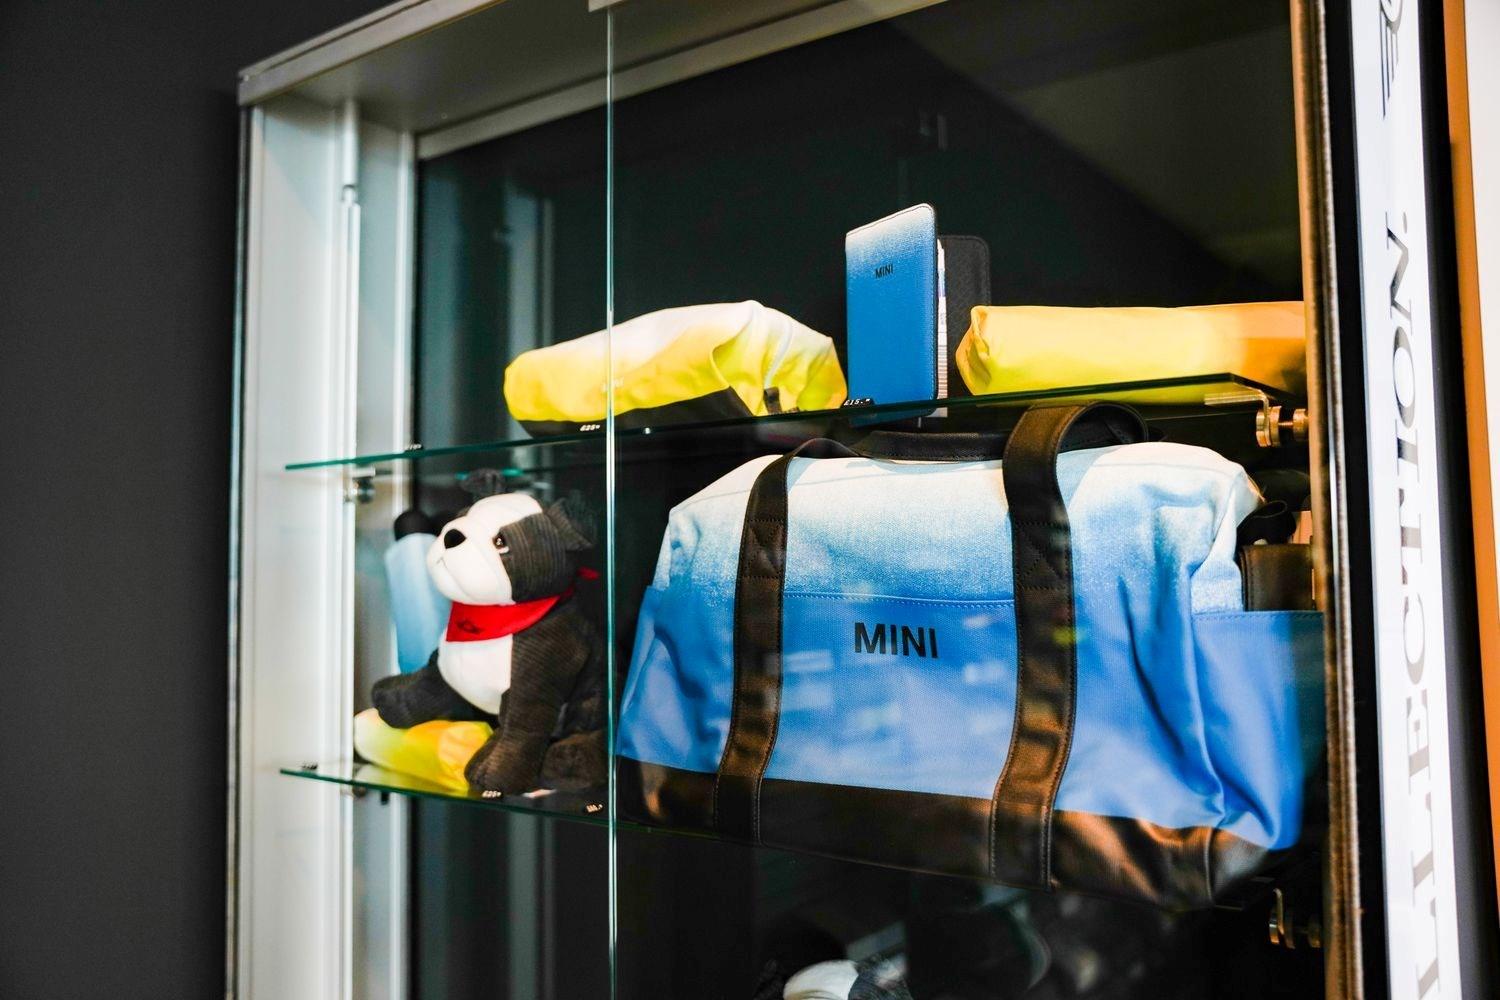 Close-up of some of the MINI Accessories & Merchandise available at Bavarian MINI. Pictured: MINI Duffle bag, MINI stationary, MINI toy dog and MINI Clothing